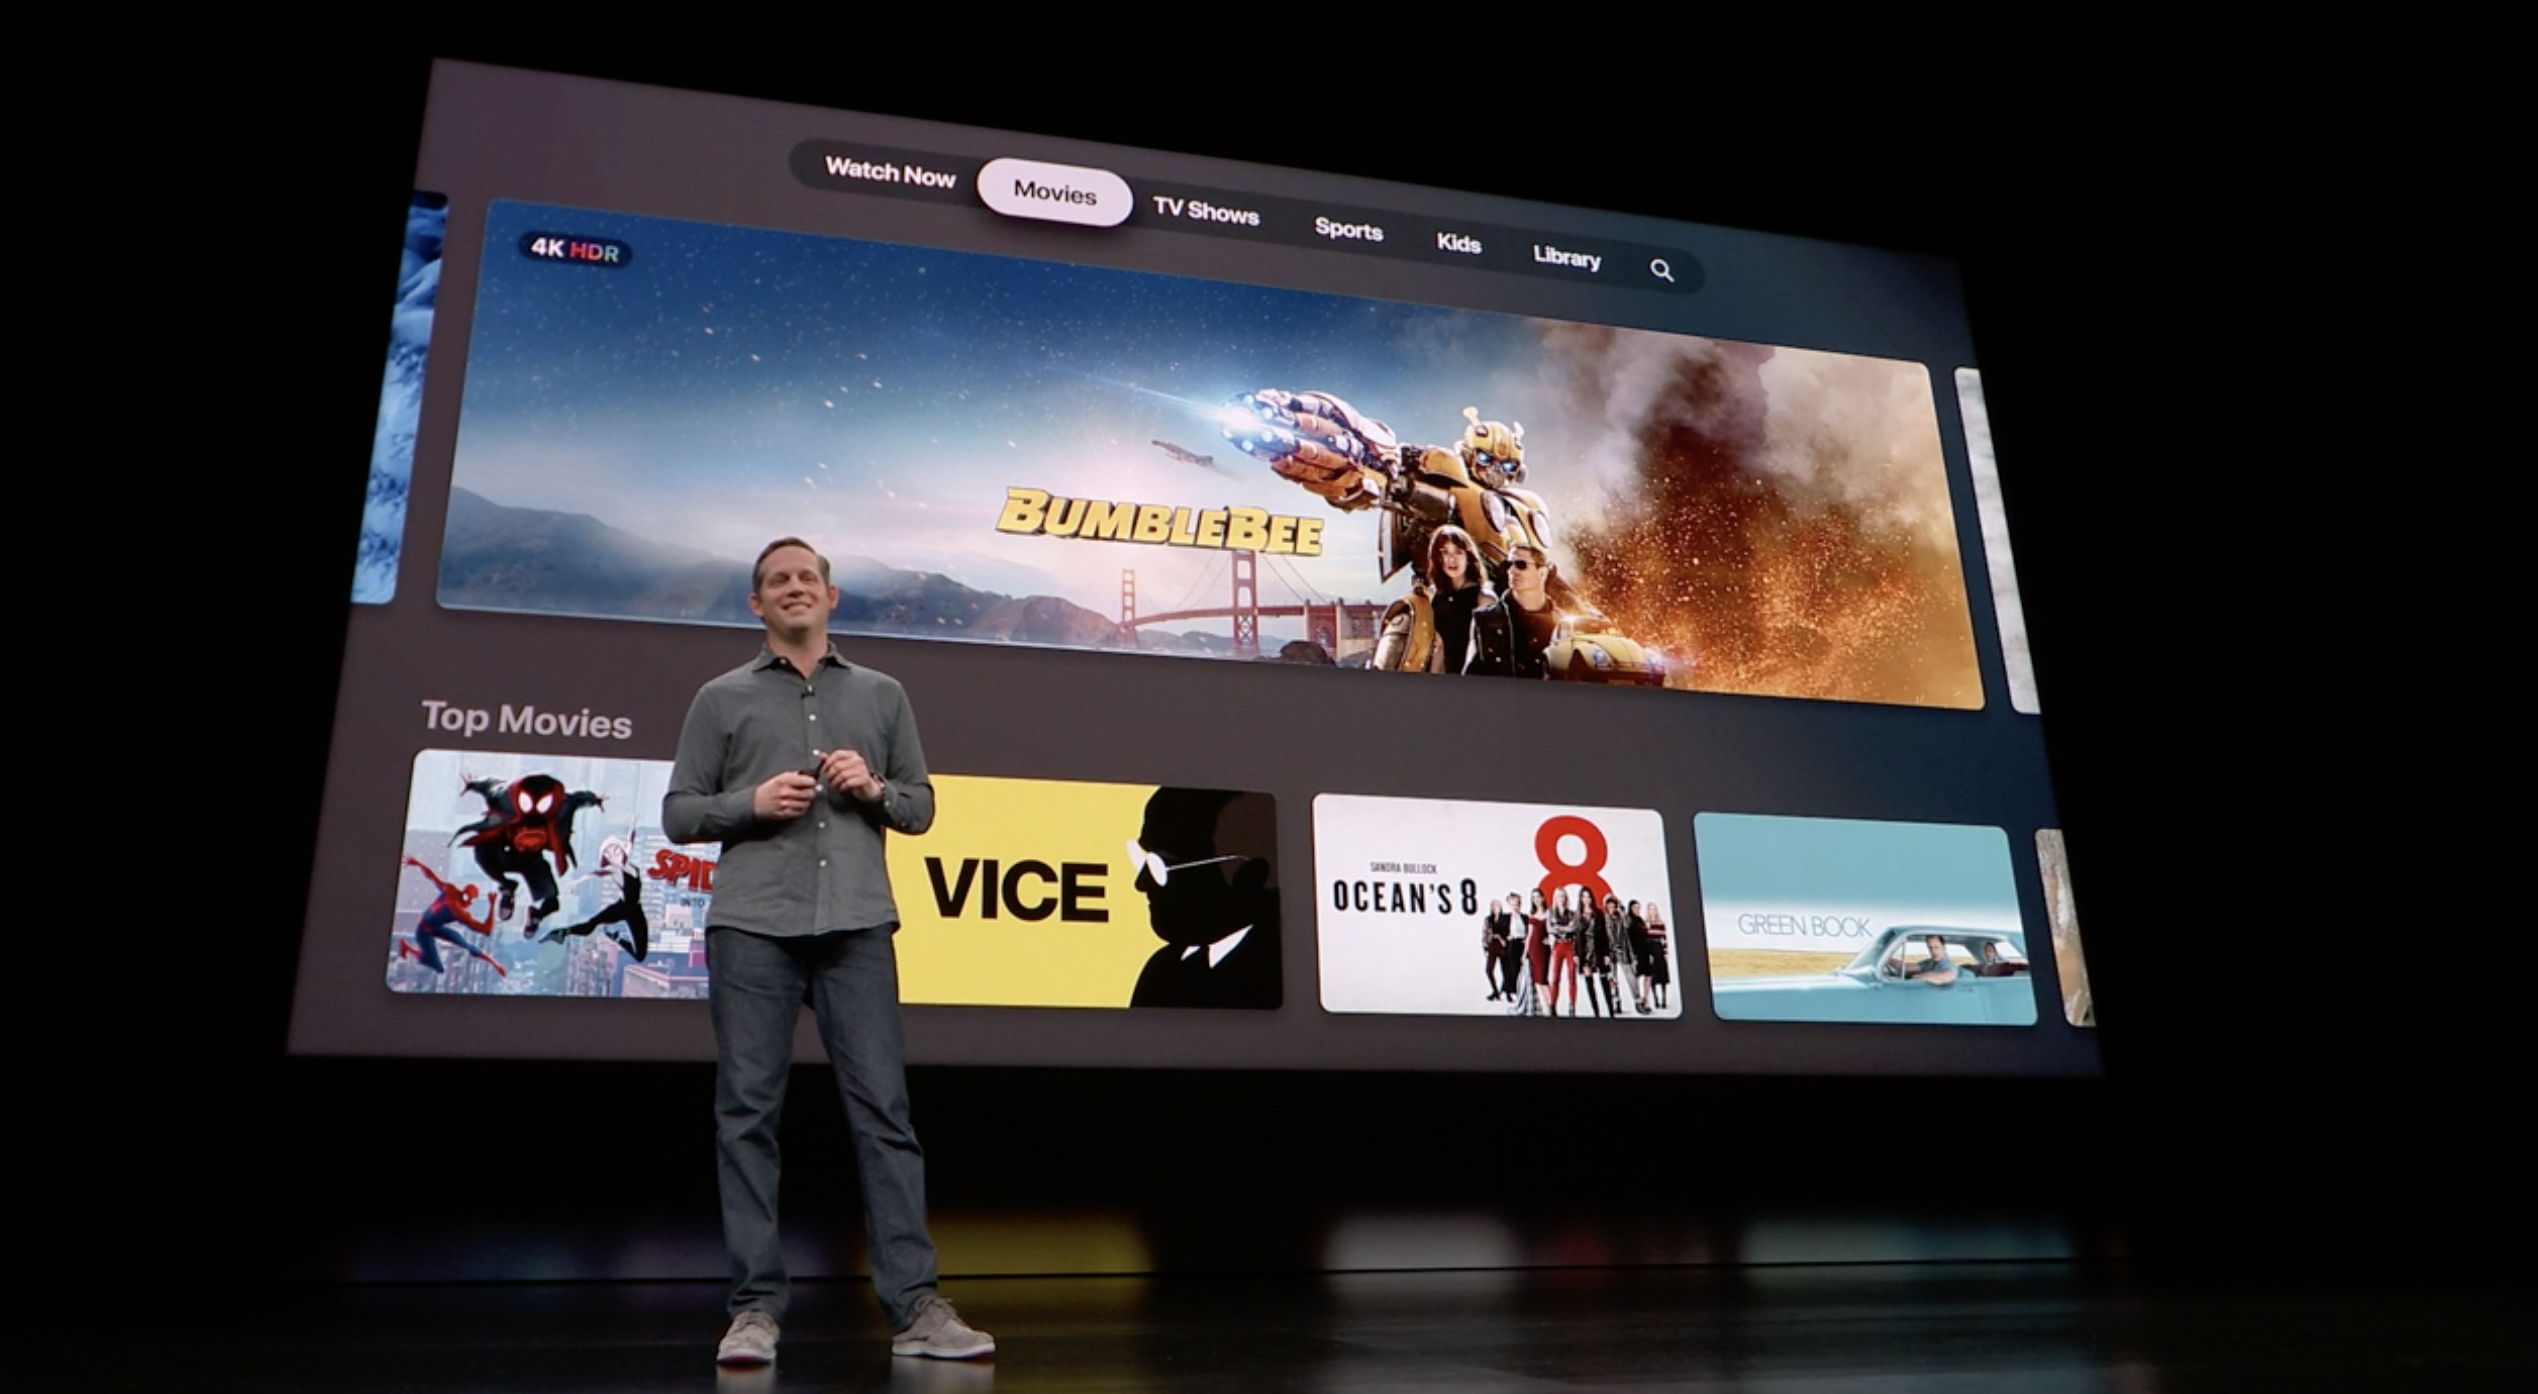 Apple app to Mac, Fire TV and Roku, smart TVs this year -